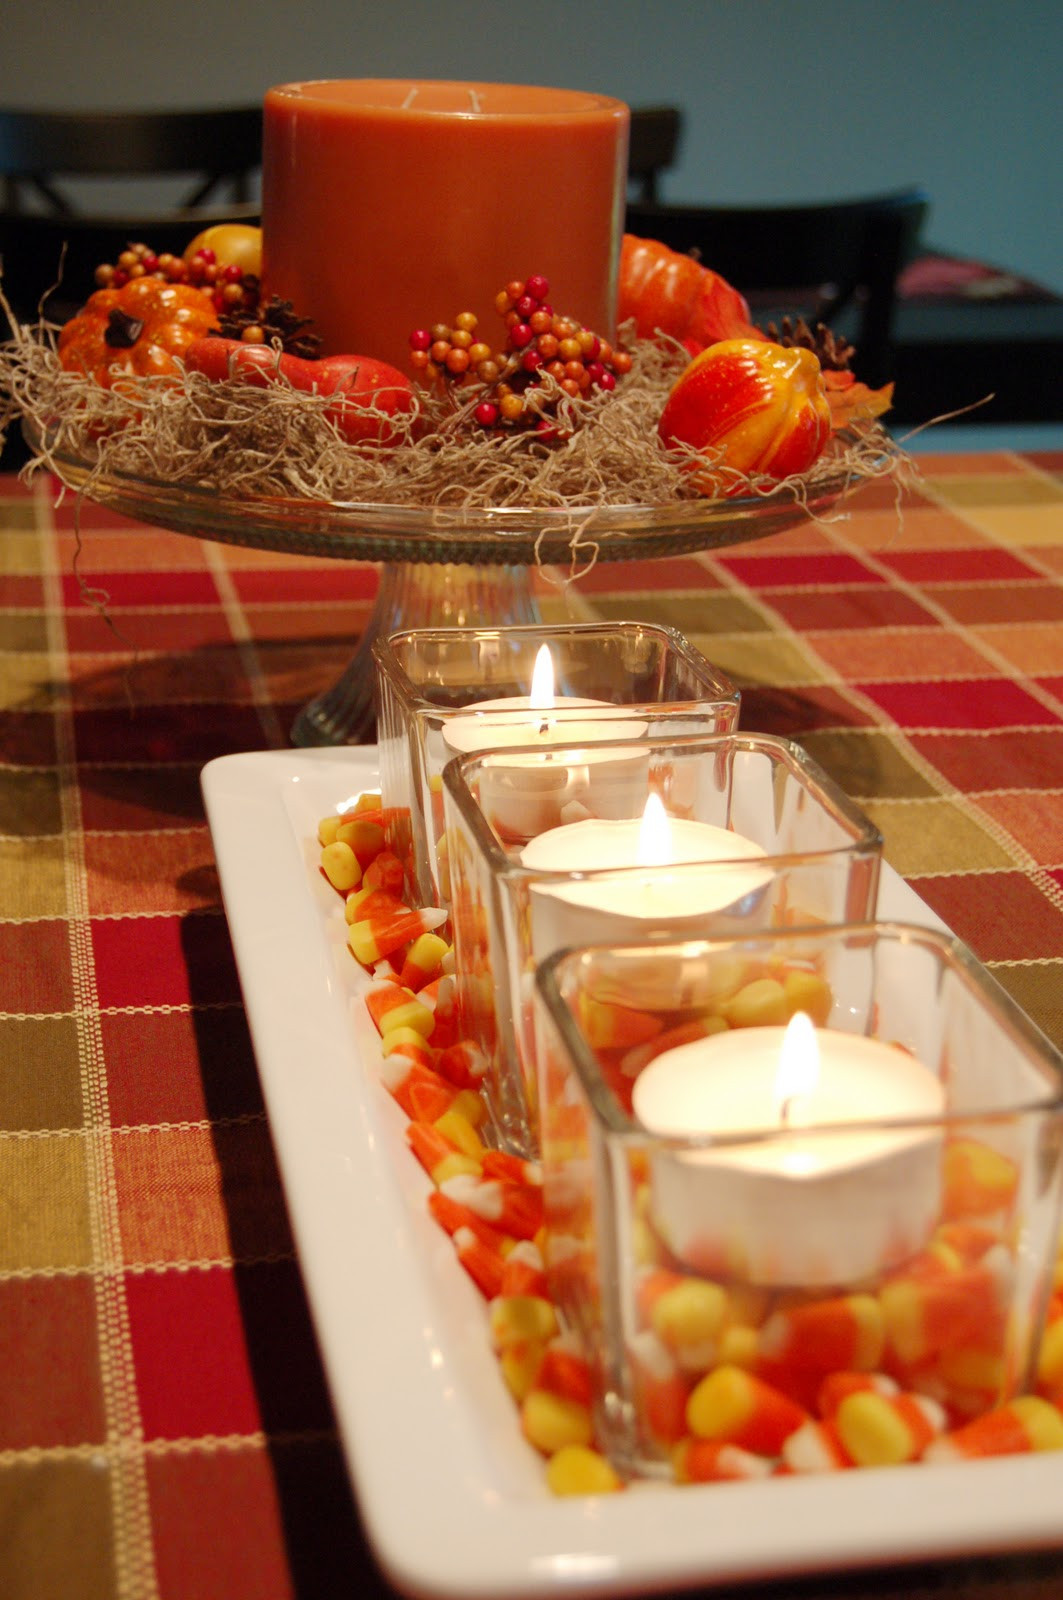 DIY Fall Decorations
 DIY Fall Centerpiece Projects